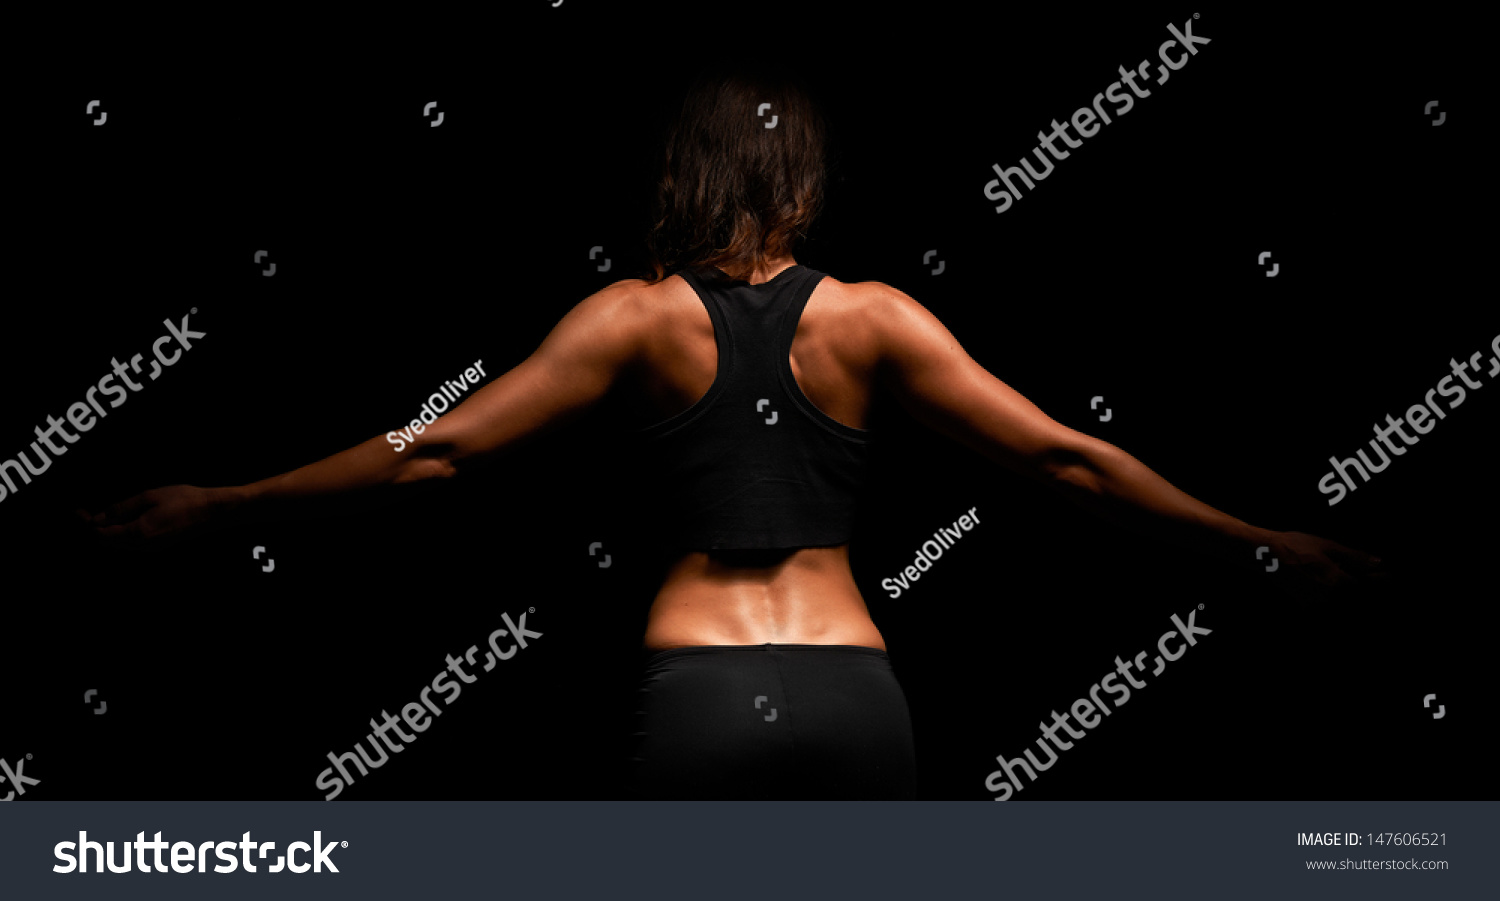 Upper Body Of A Muscular Woman From The Back In A Studio Stock Photo ...